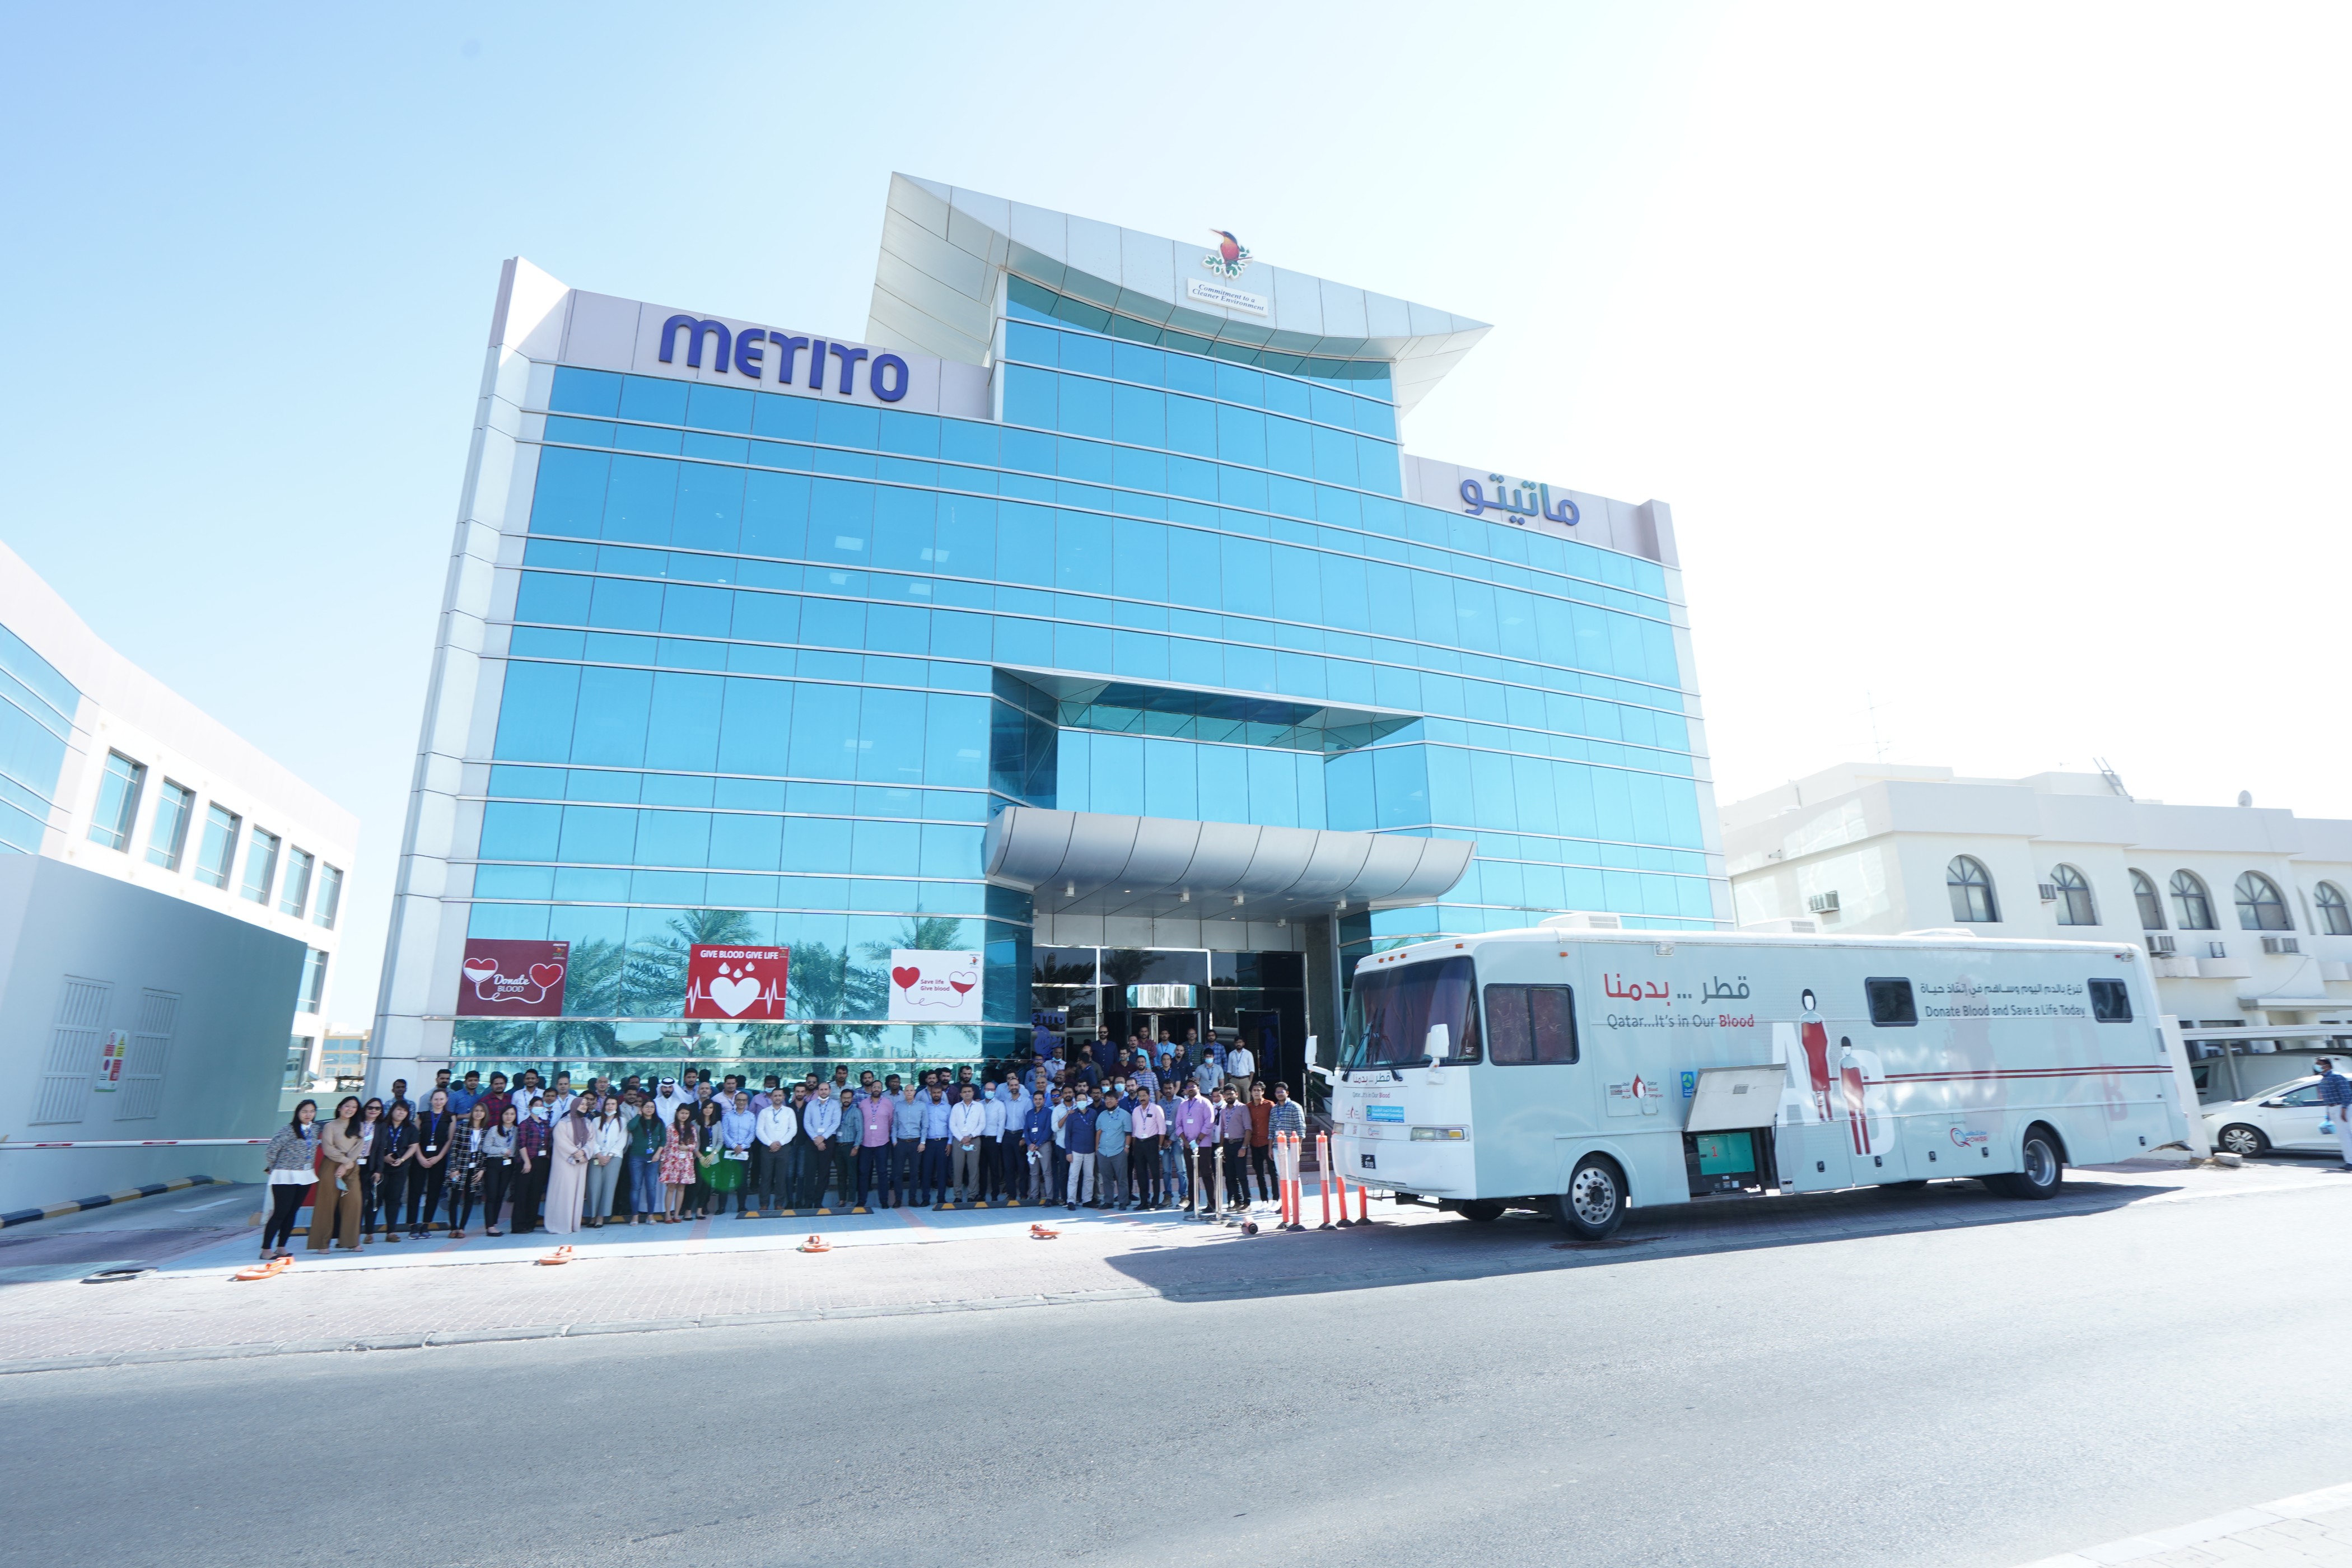 Metito Qatar Launches its First Blood Donation Drive